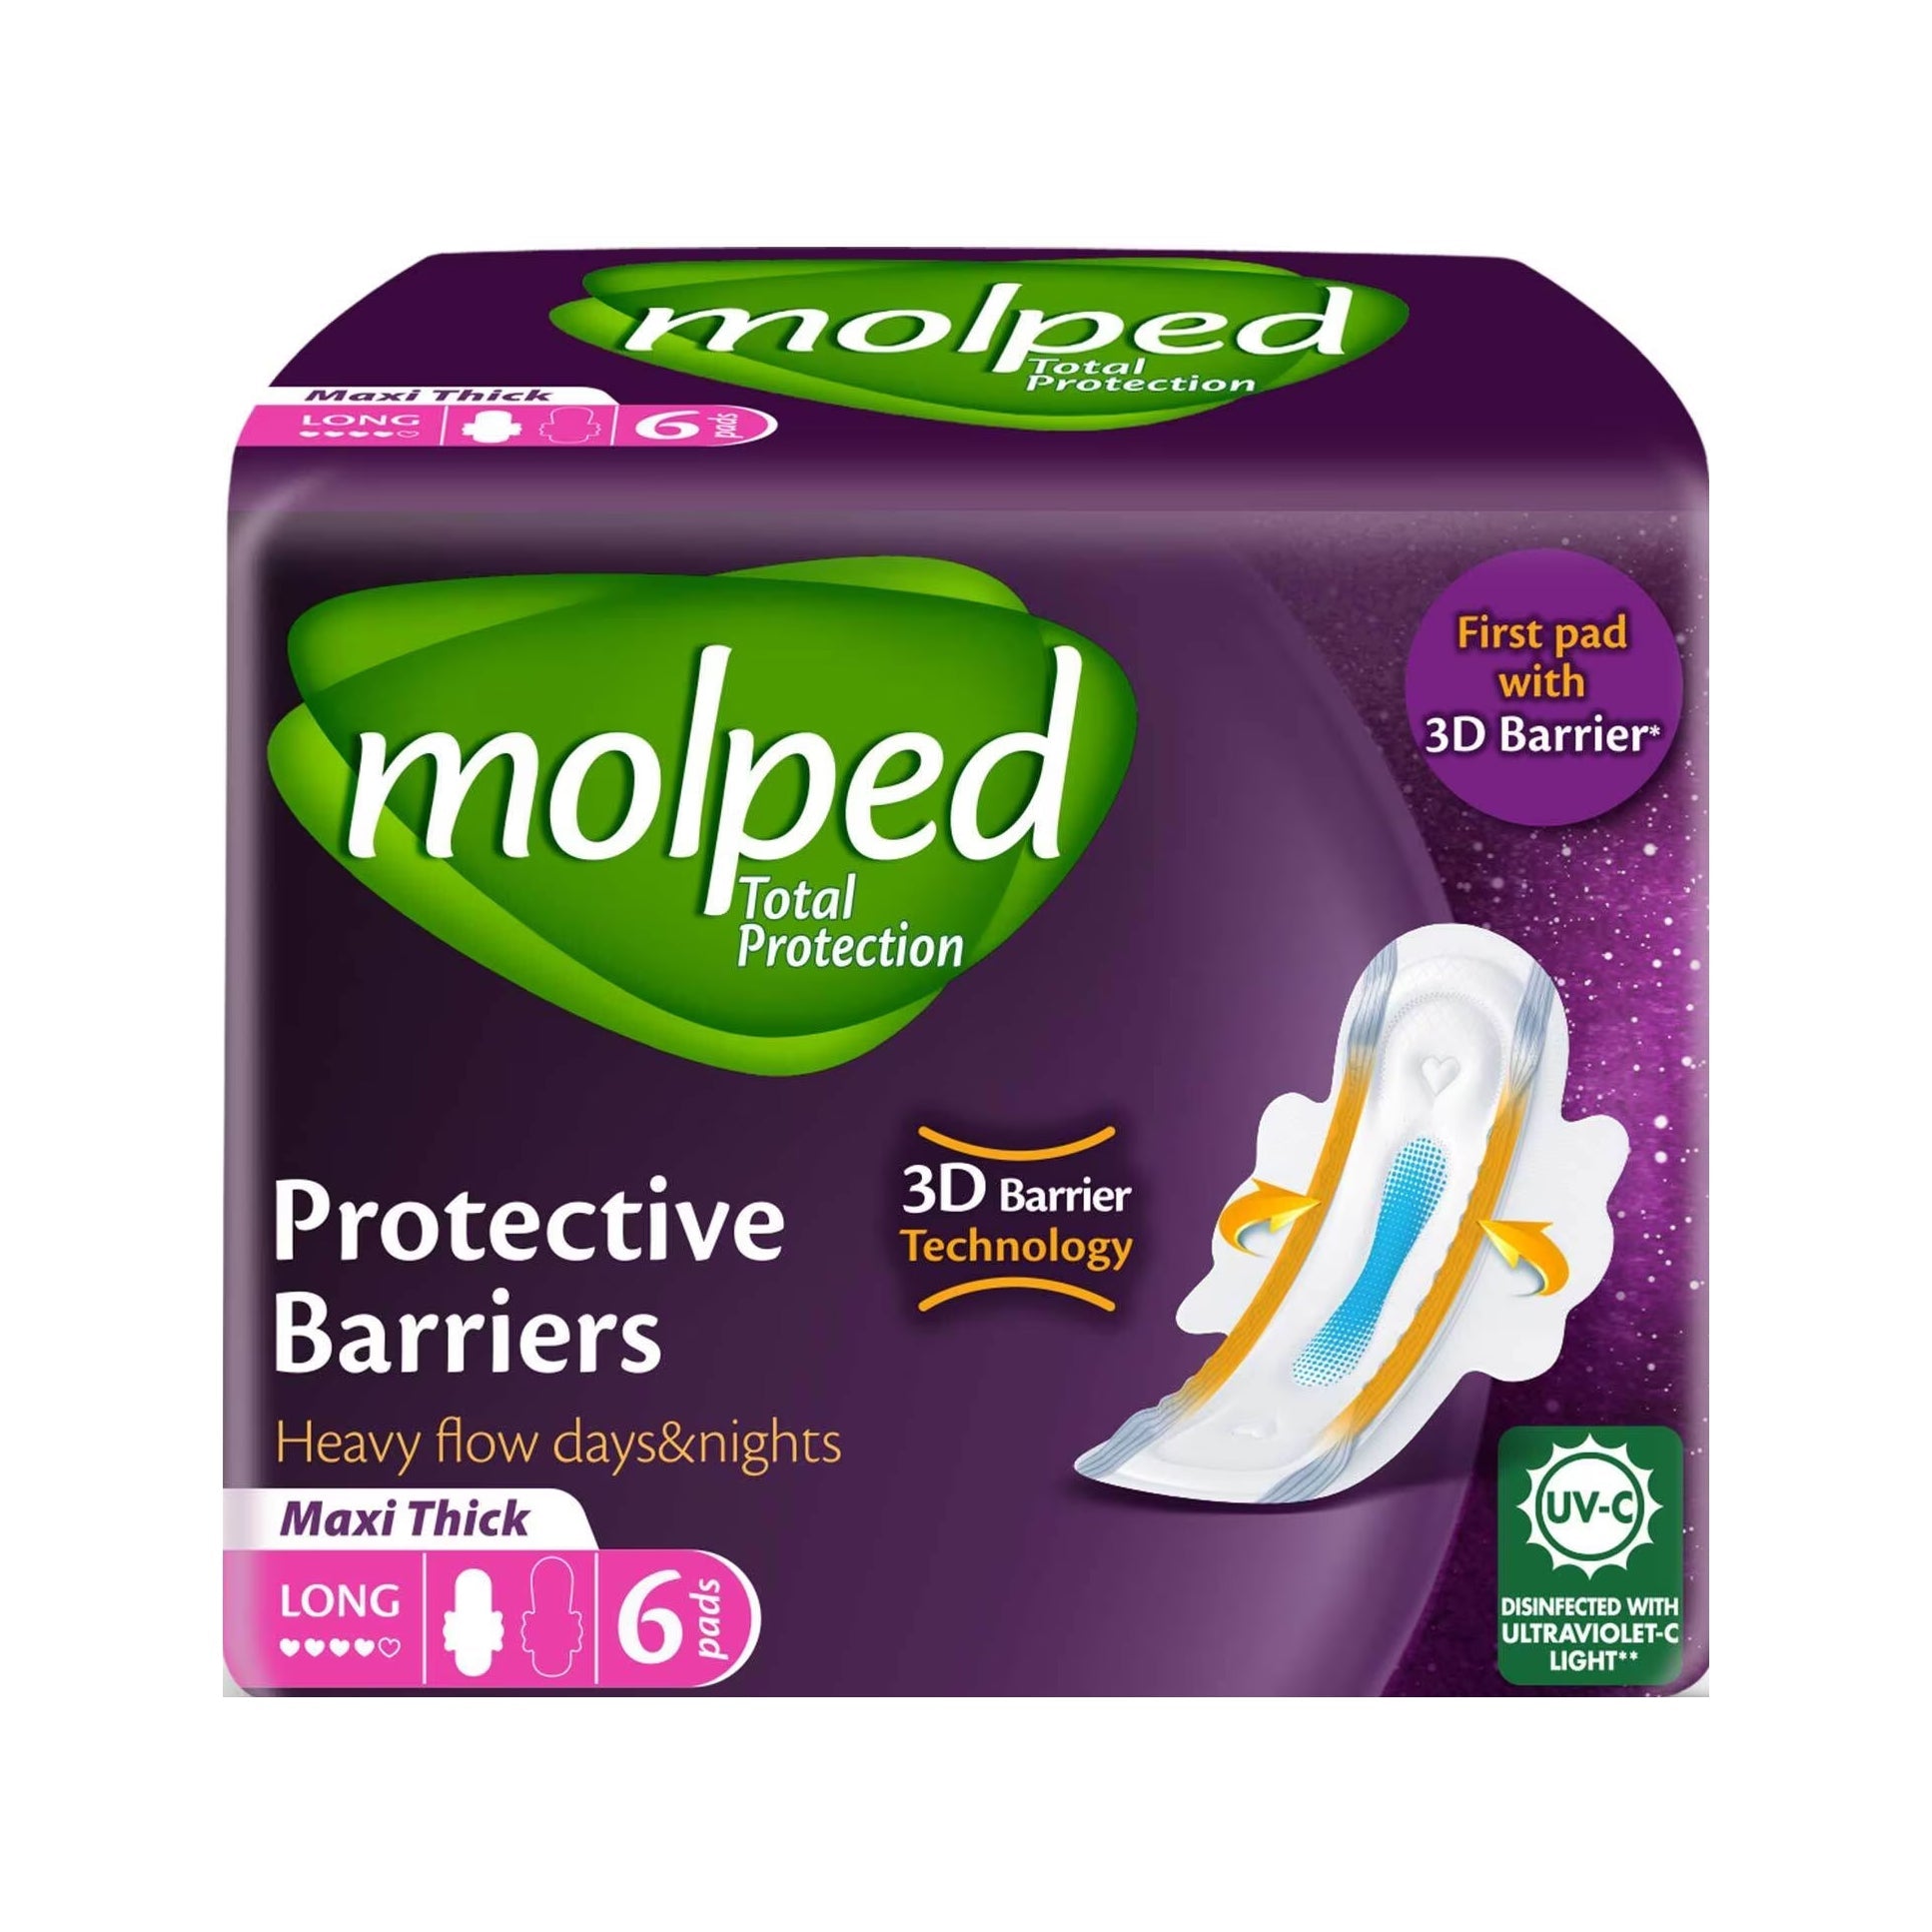 Molped Protective Barriers Maxi Thick Long Pads - 6 Pads - Bloom Pharmacy